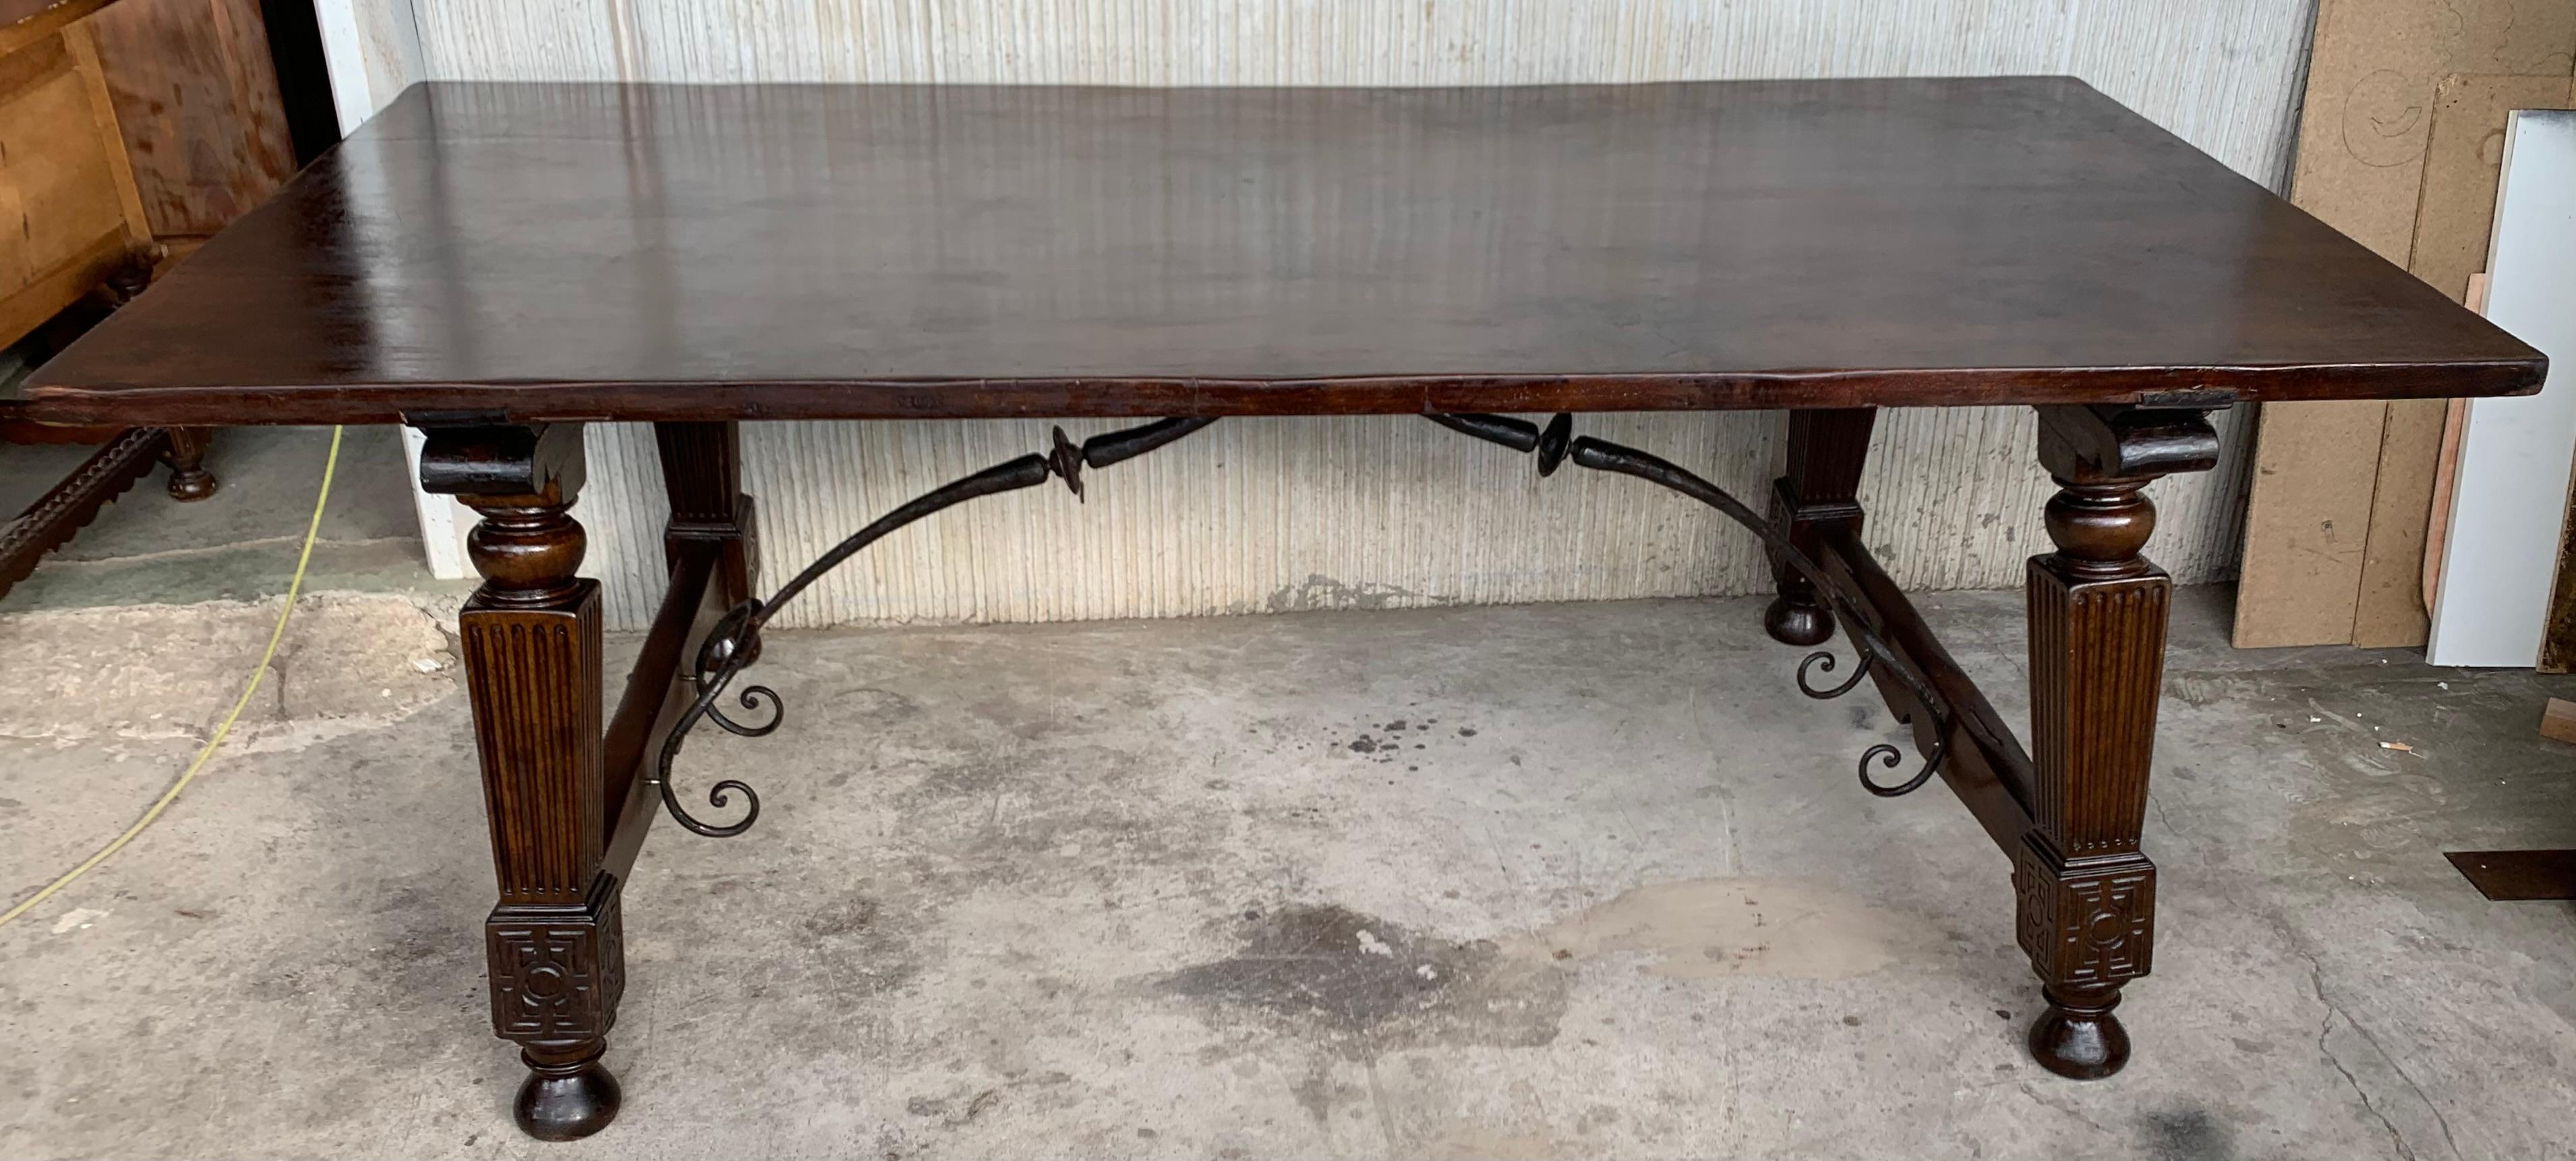 Late 19th Spanish Walnut Dining Fratino Table with Iron Stretcher For Sale 4